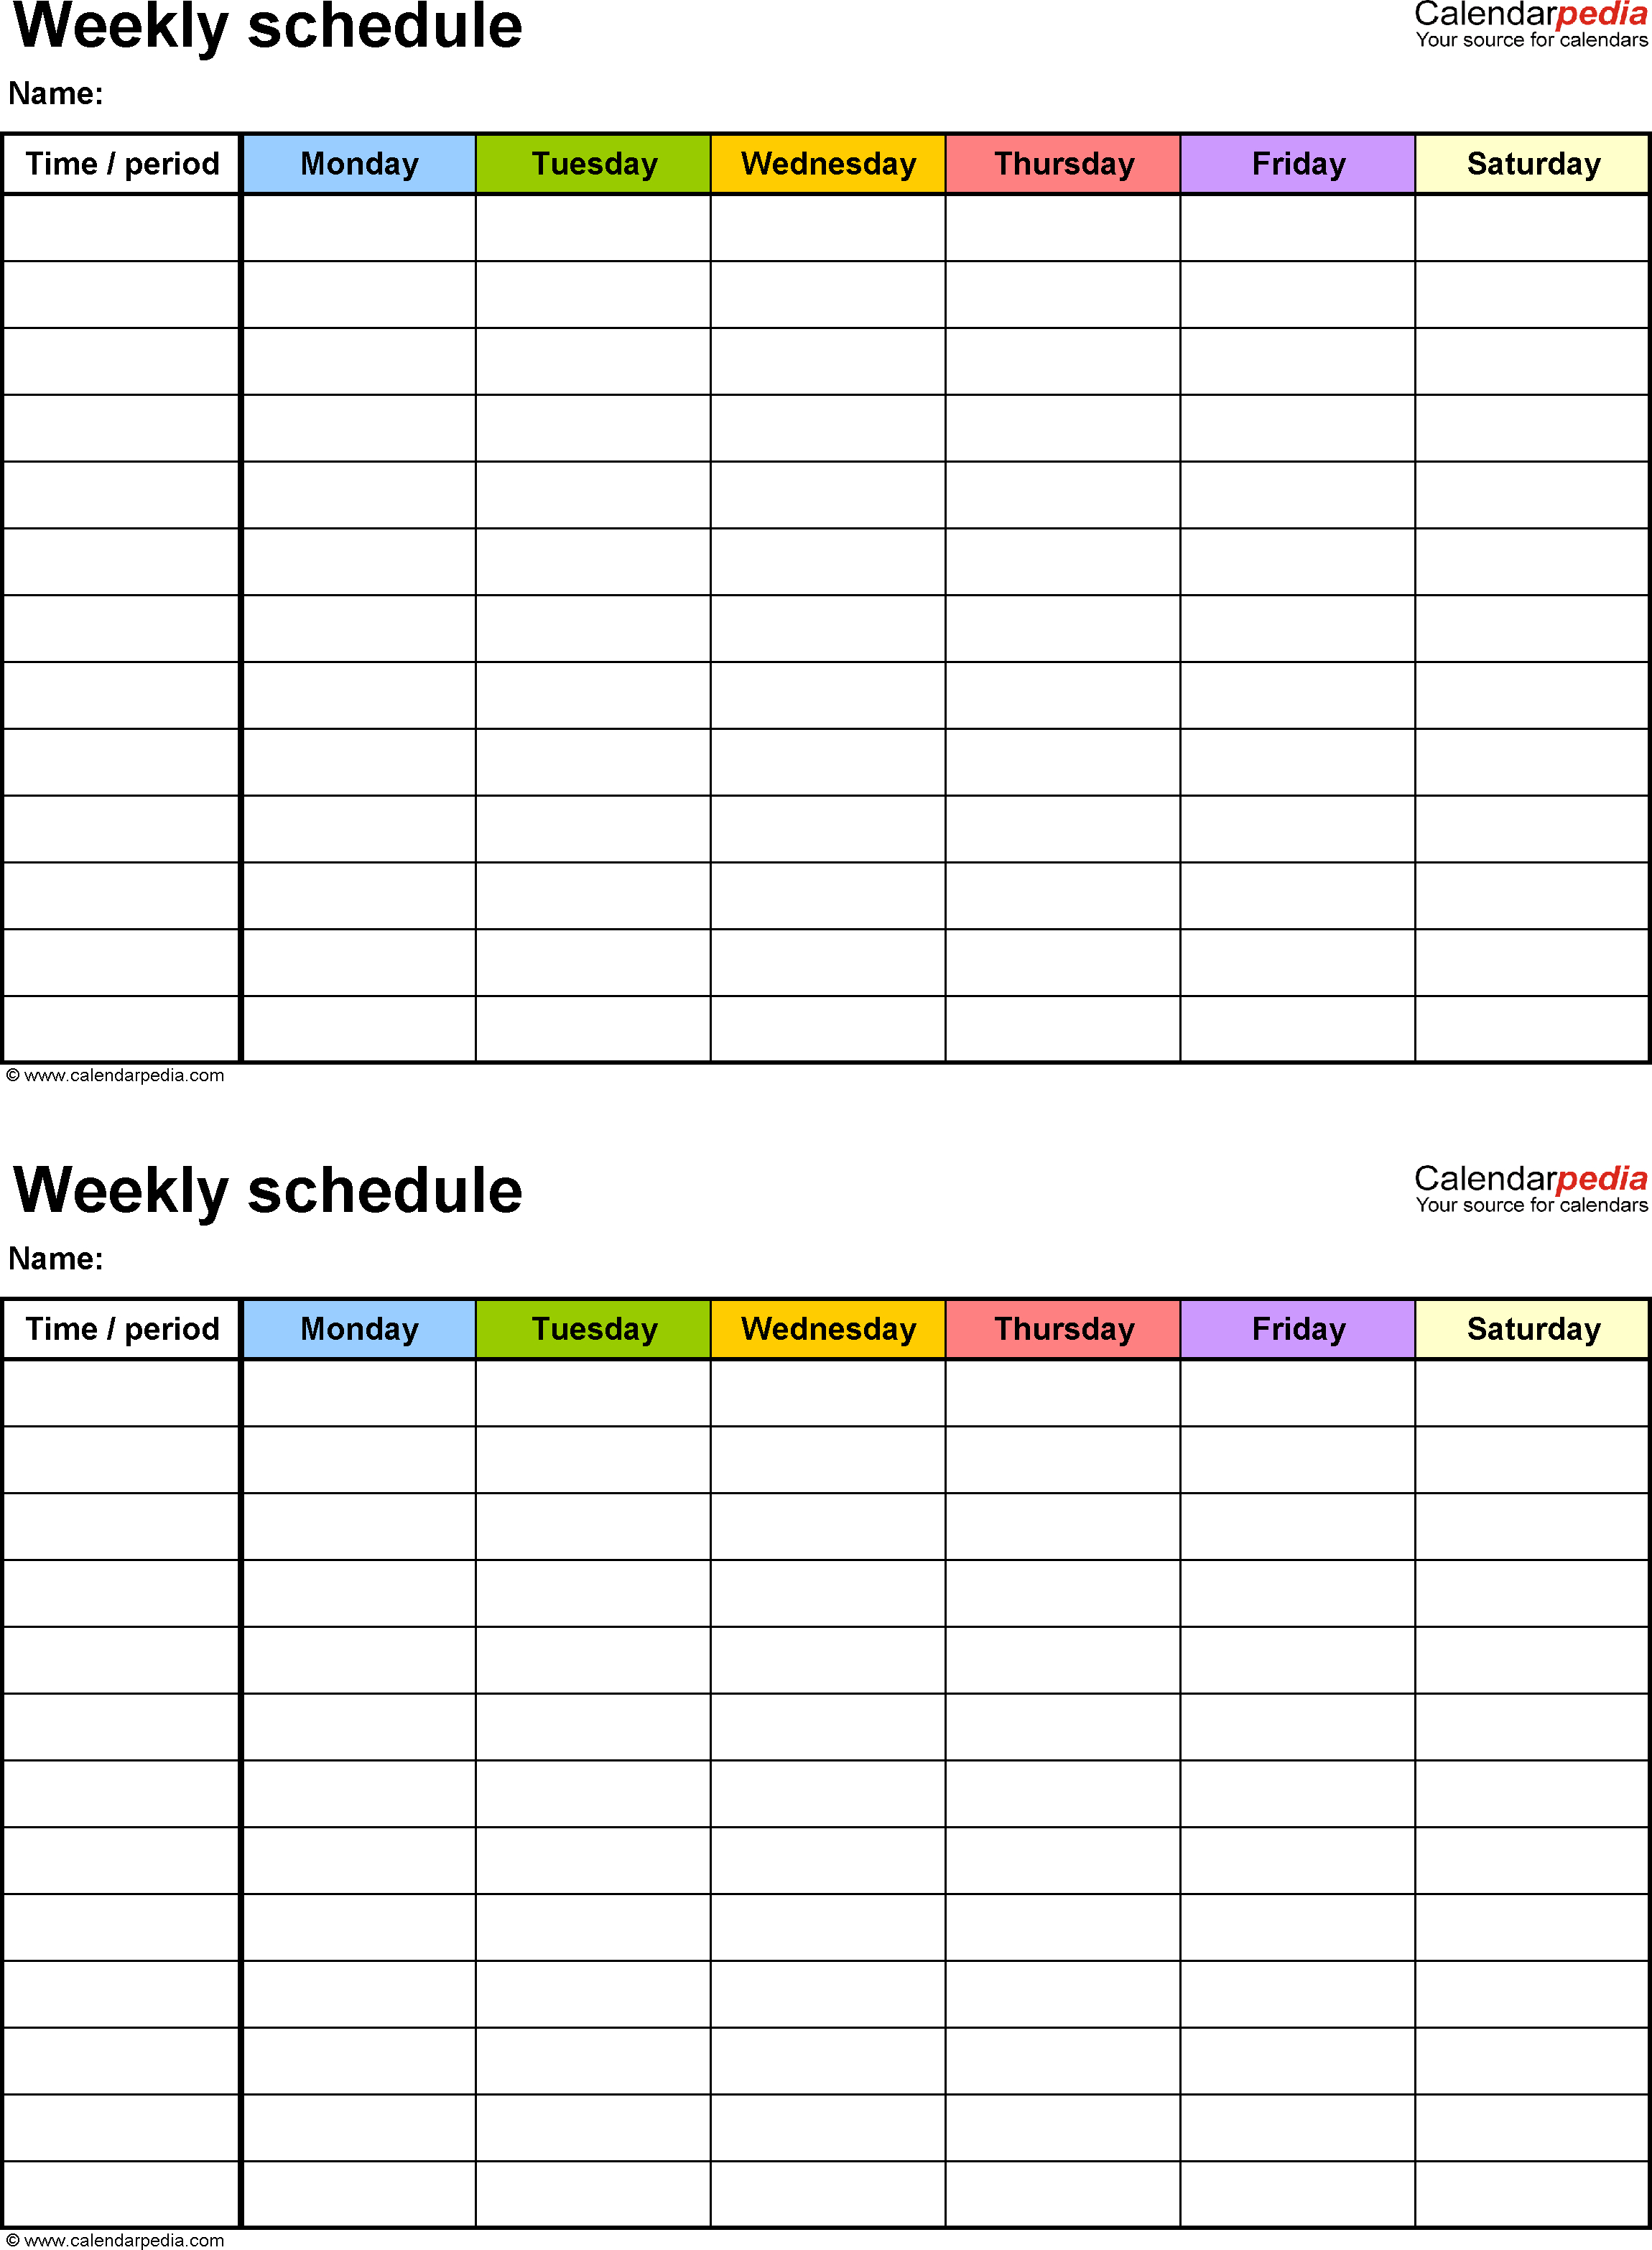 Free Weekly Schedule Templates For Word  18 Templates in Sunday Through Saturday Schedule Template